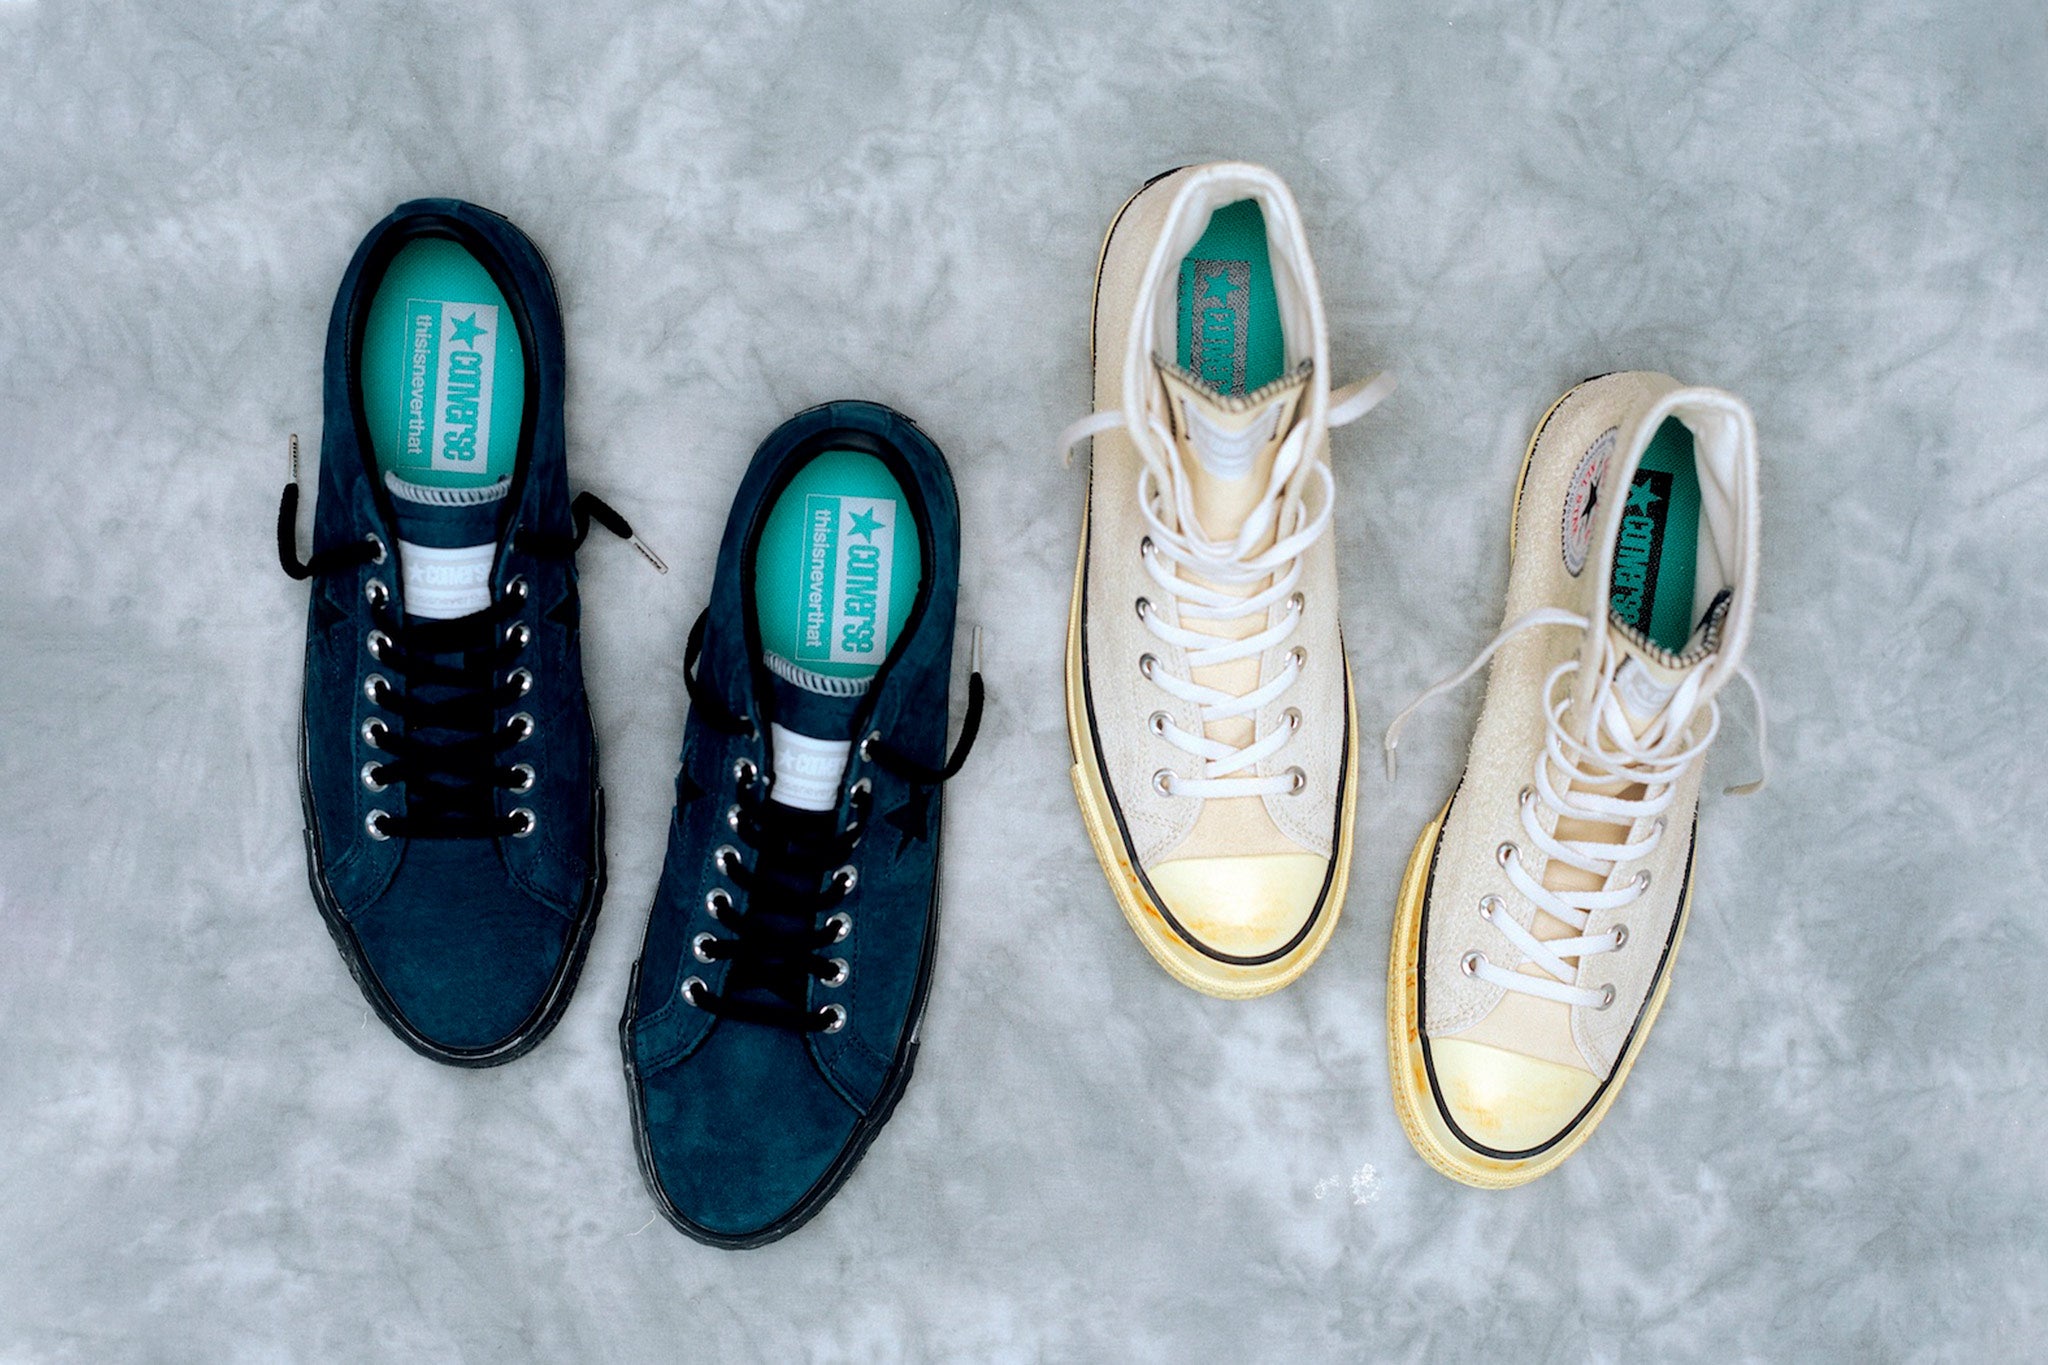 thisneverthat x Converse “New Vintage” Collection – Capsule